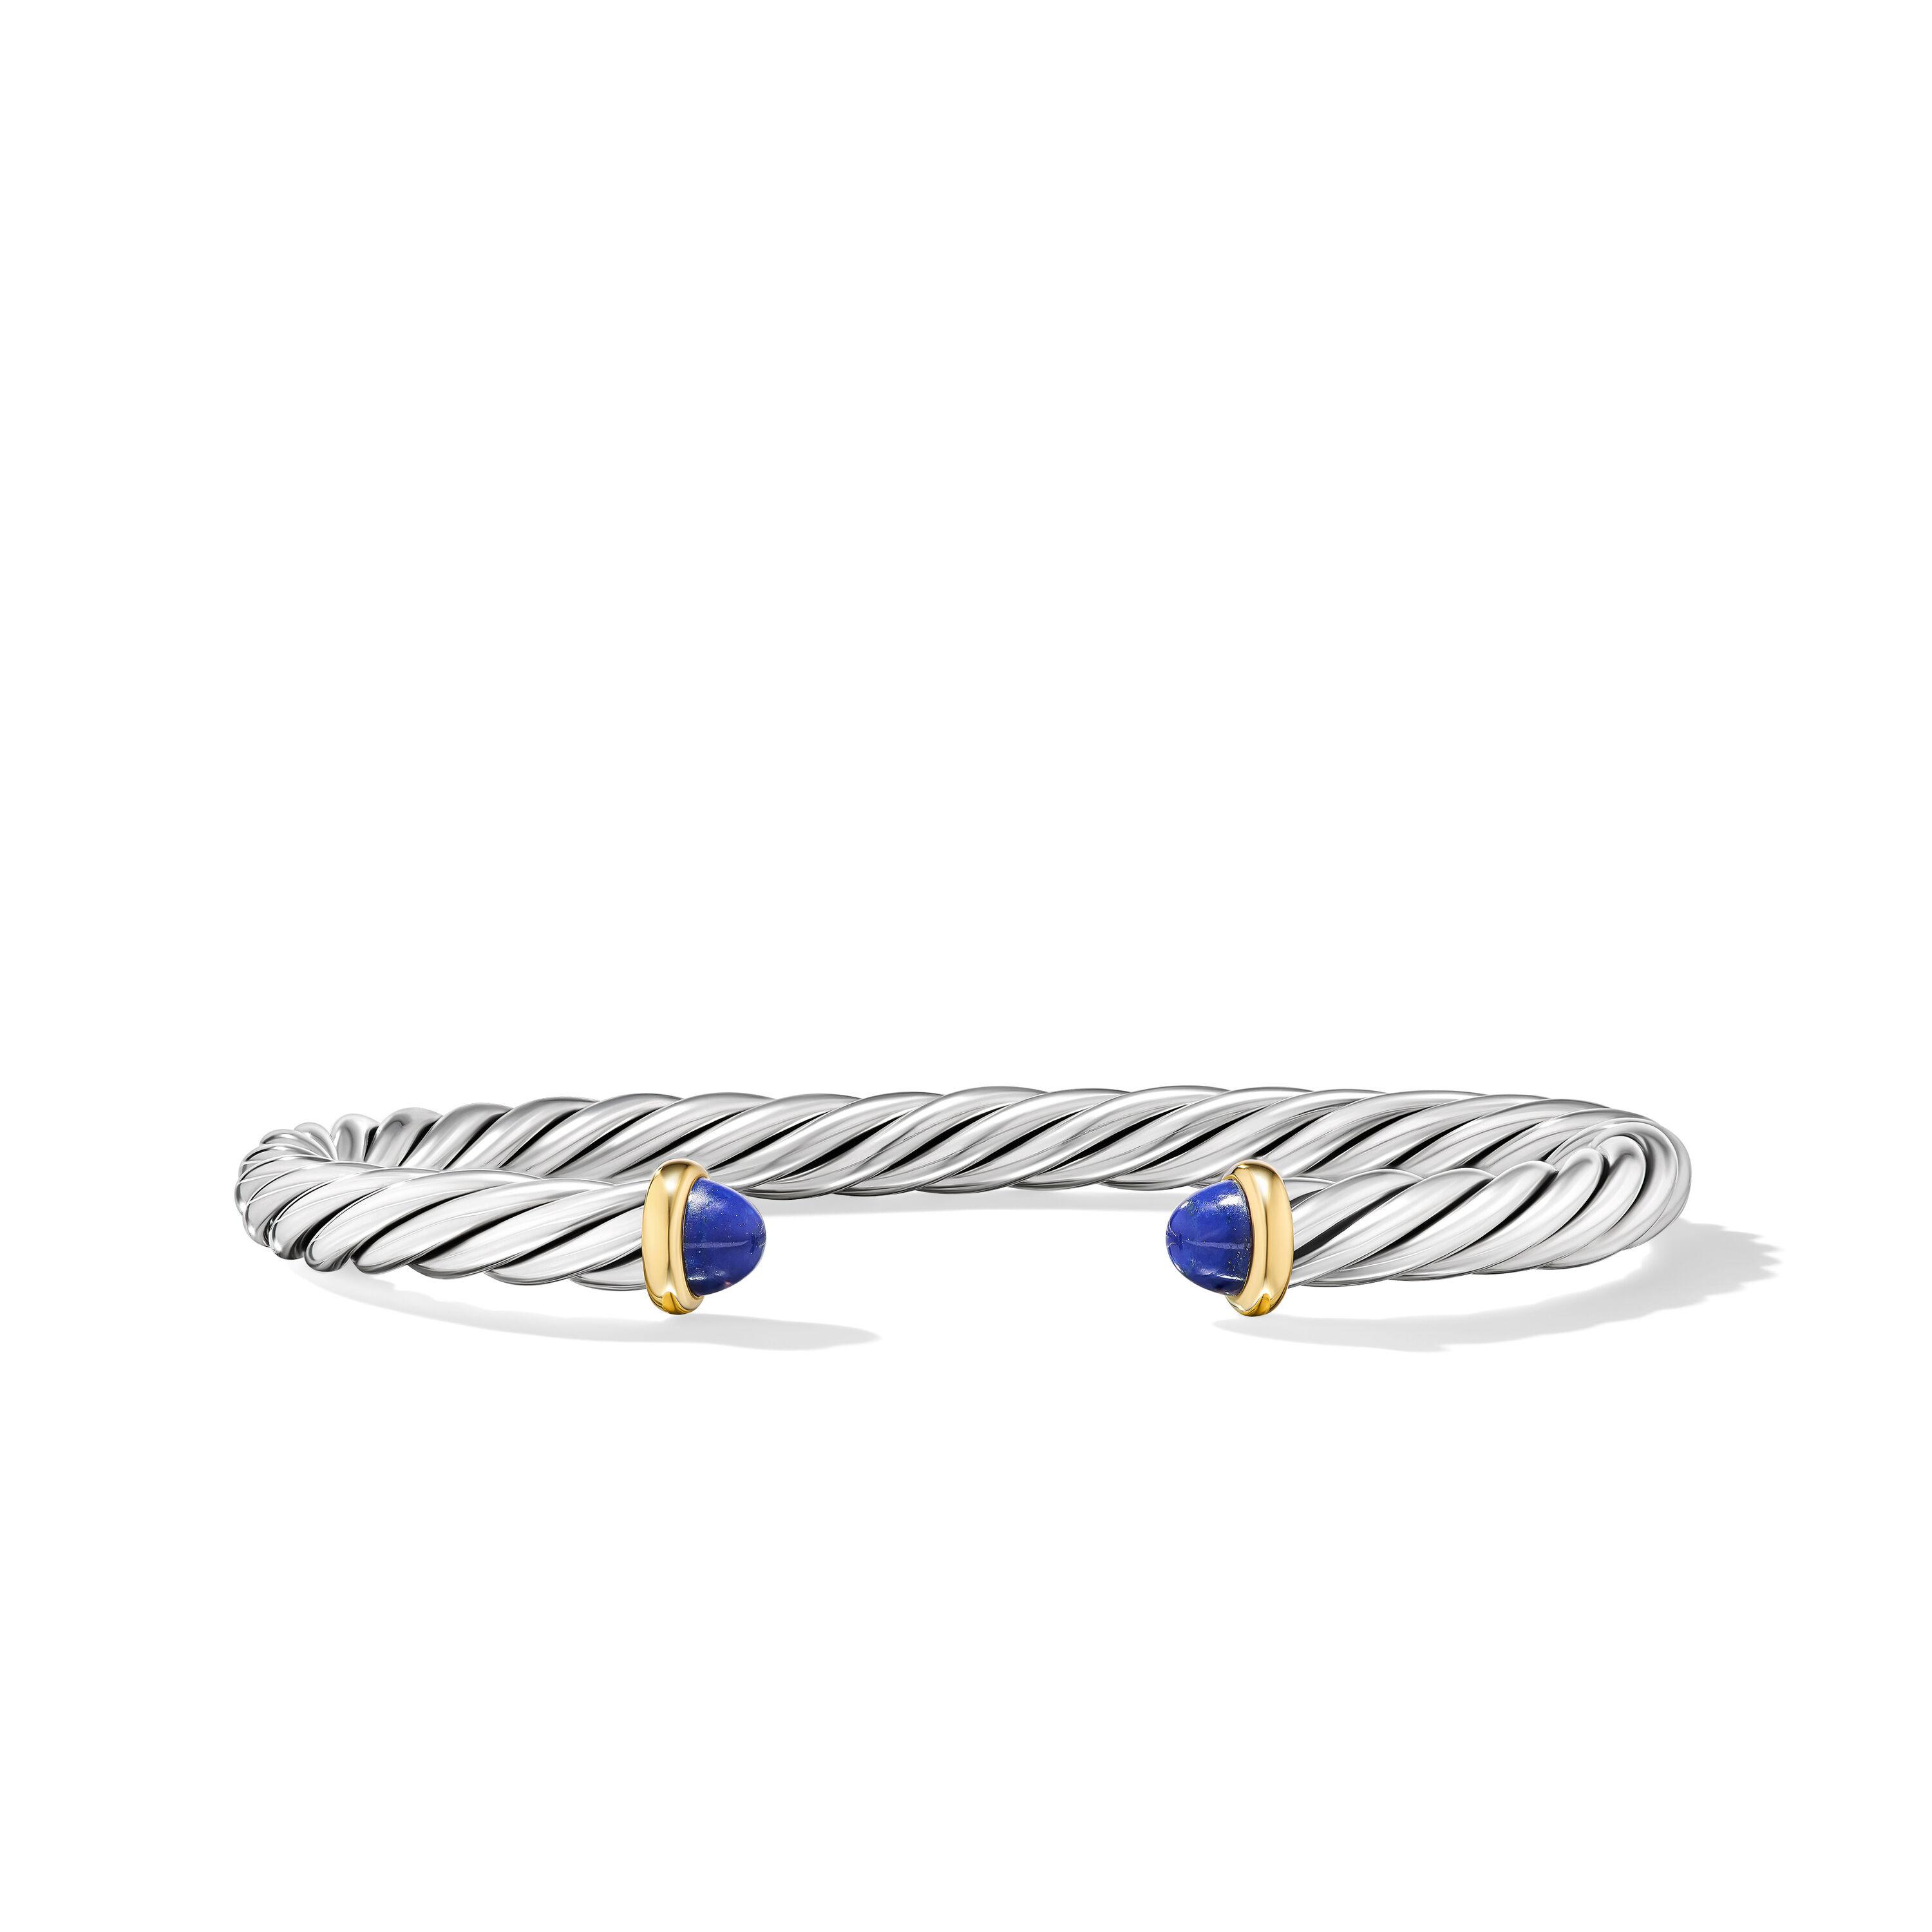 David Yurman 6mm Cable Cuff Bracelet in Sterling Silver with 14K Yellow Gold and Lapis, Medium 0